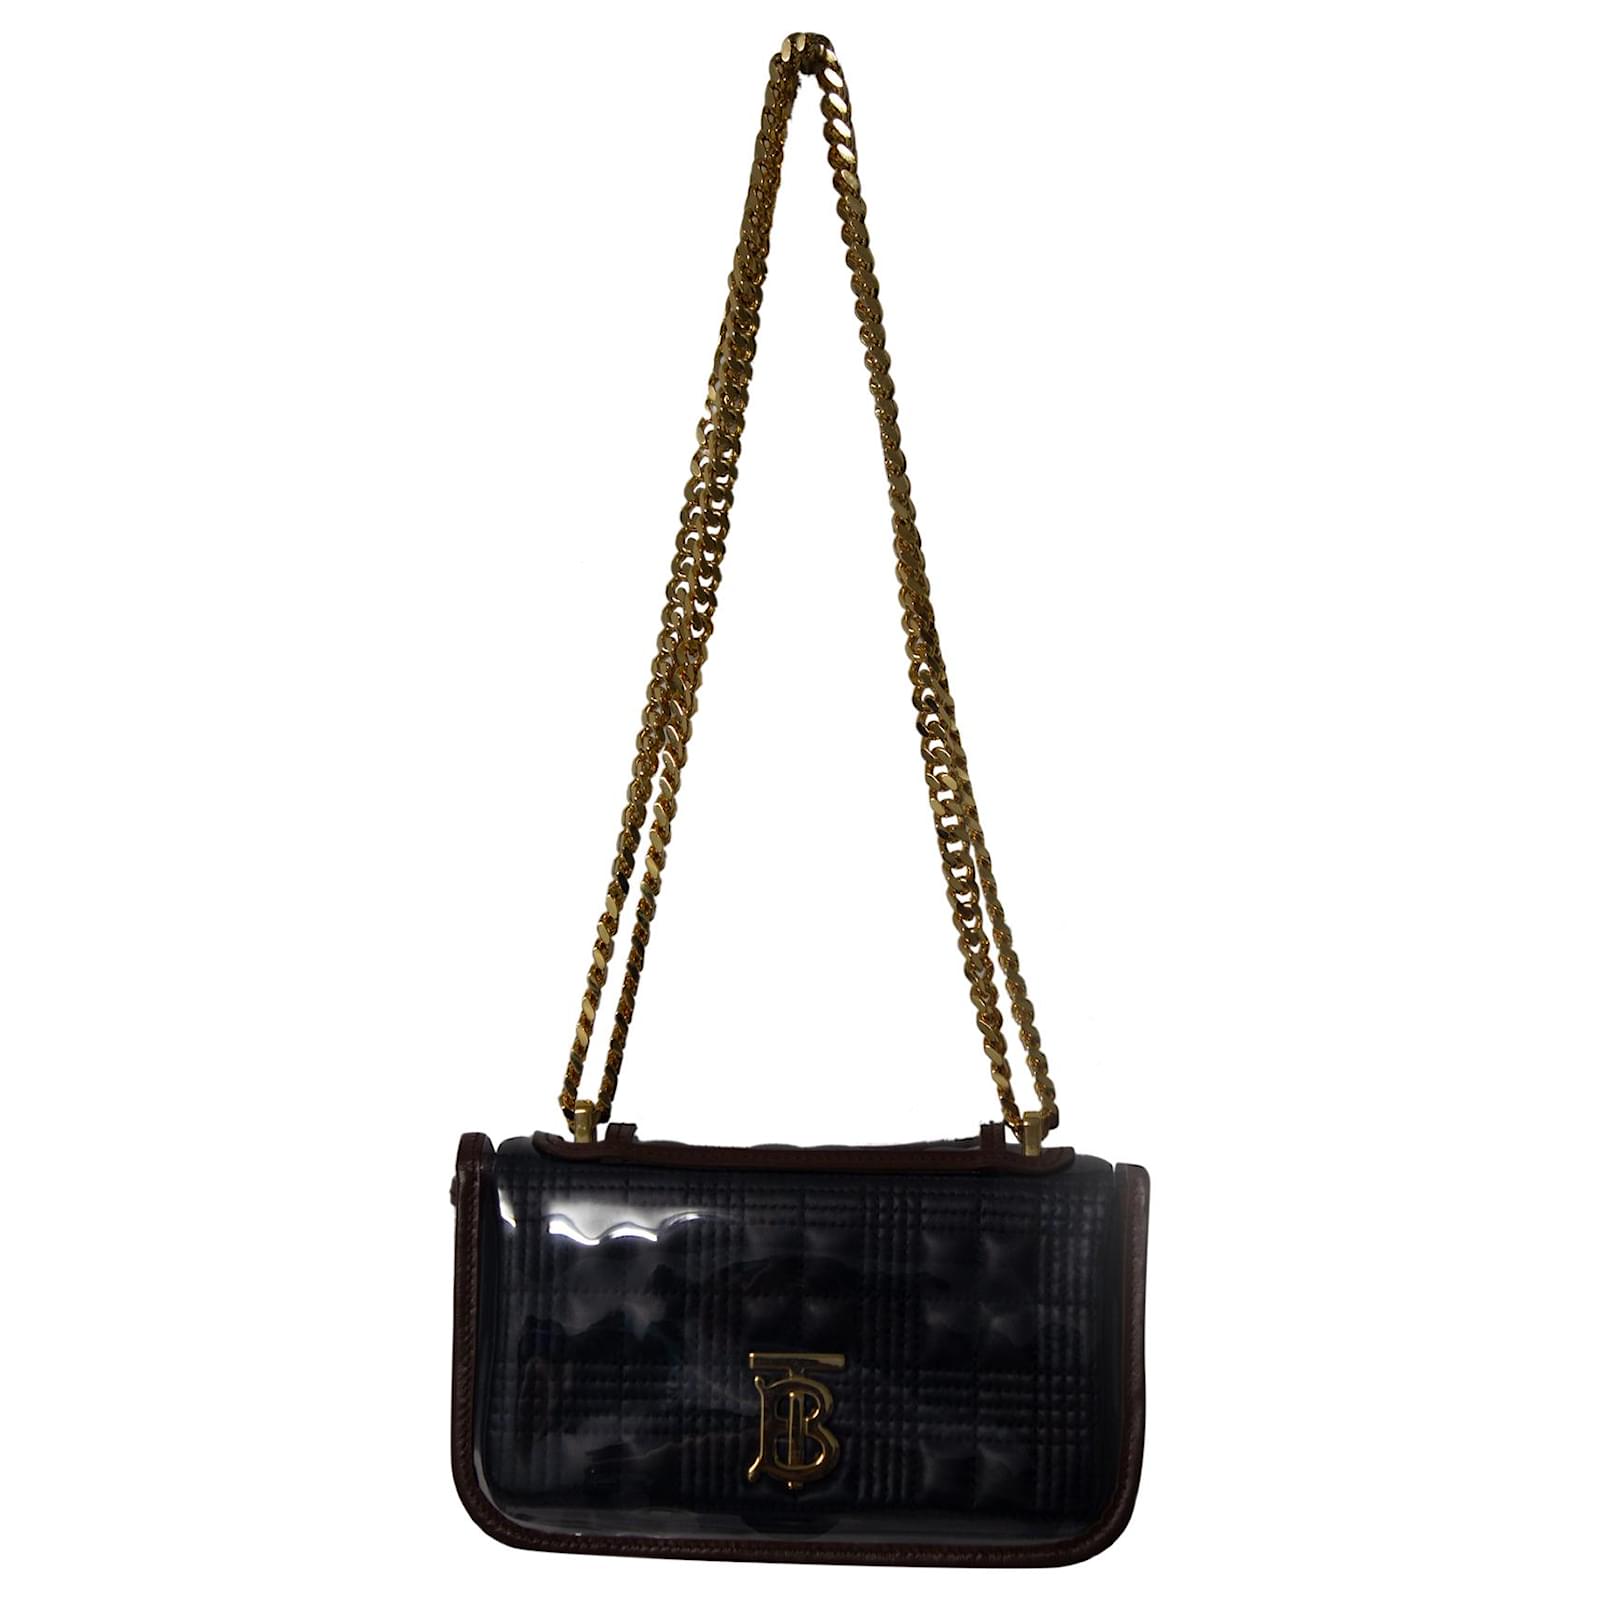 BURBERRY Lola Small Leather Shoulder Bag